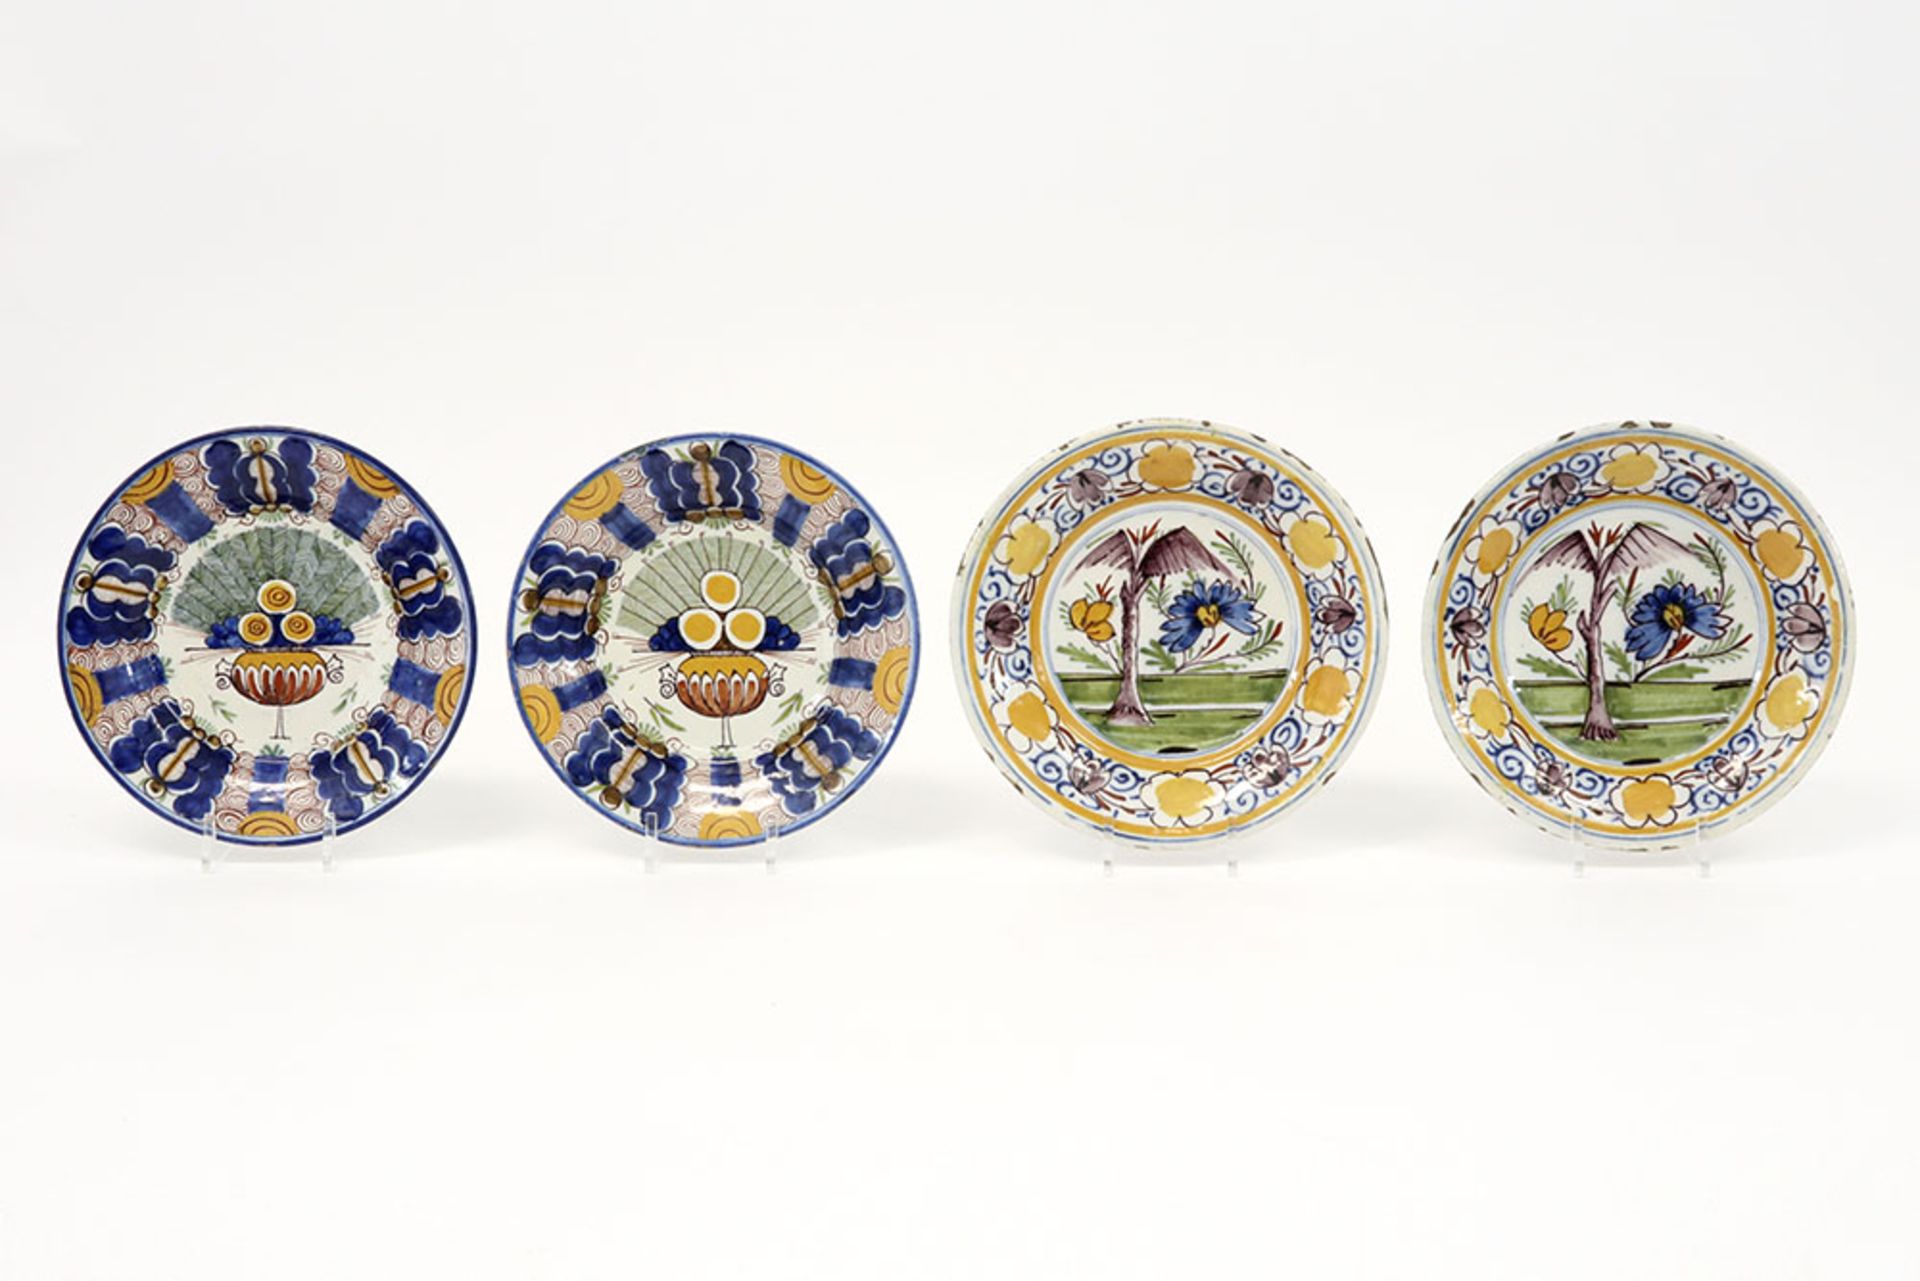 two pairs of 18th Cent. plates in ceramic from Delft with a polychrome decor || Lot van twee paar